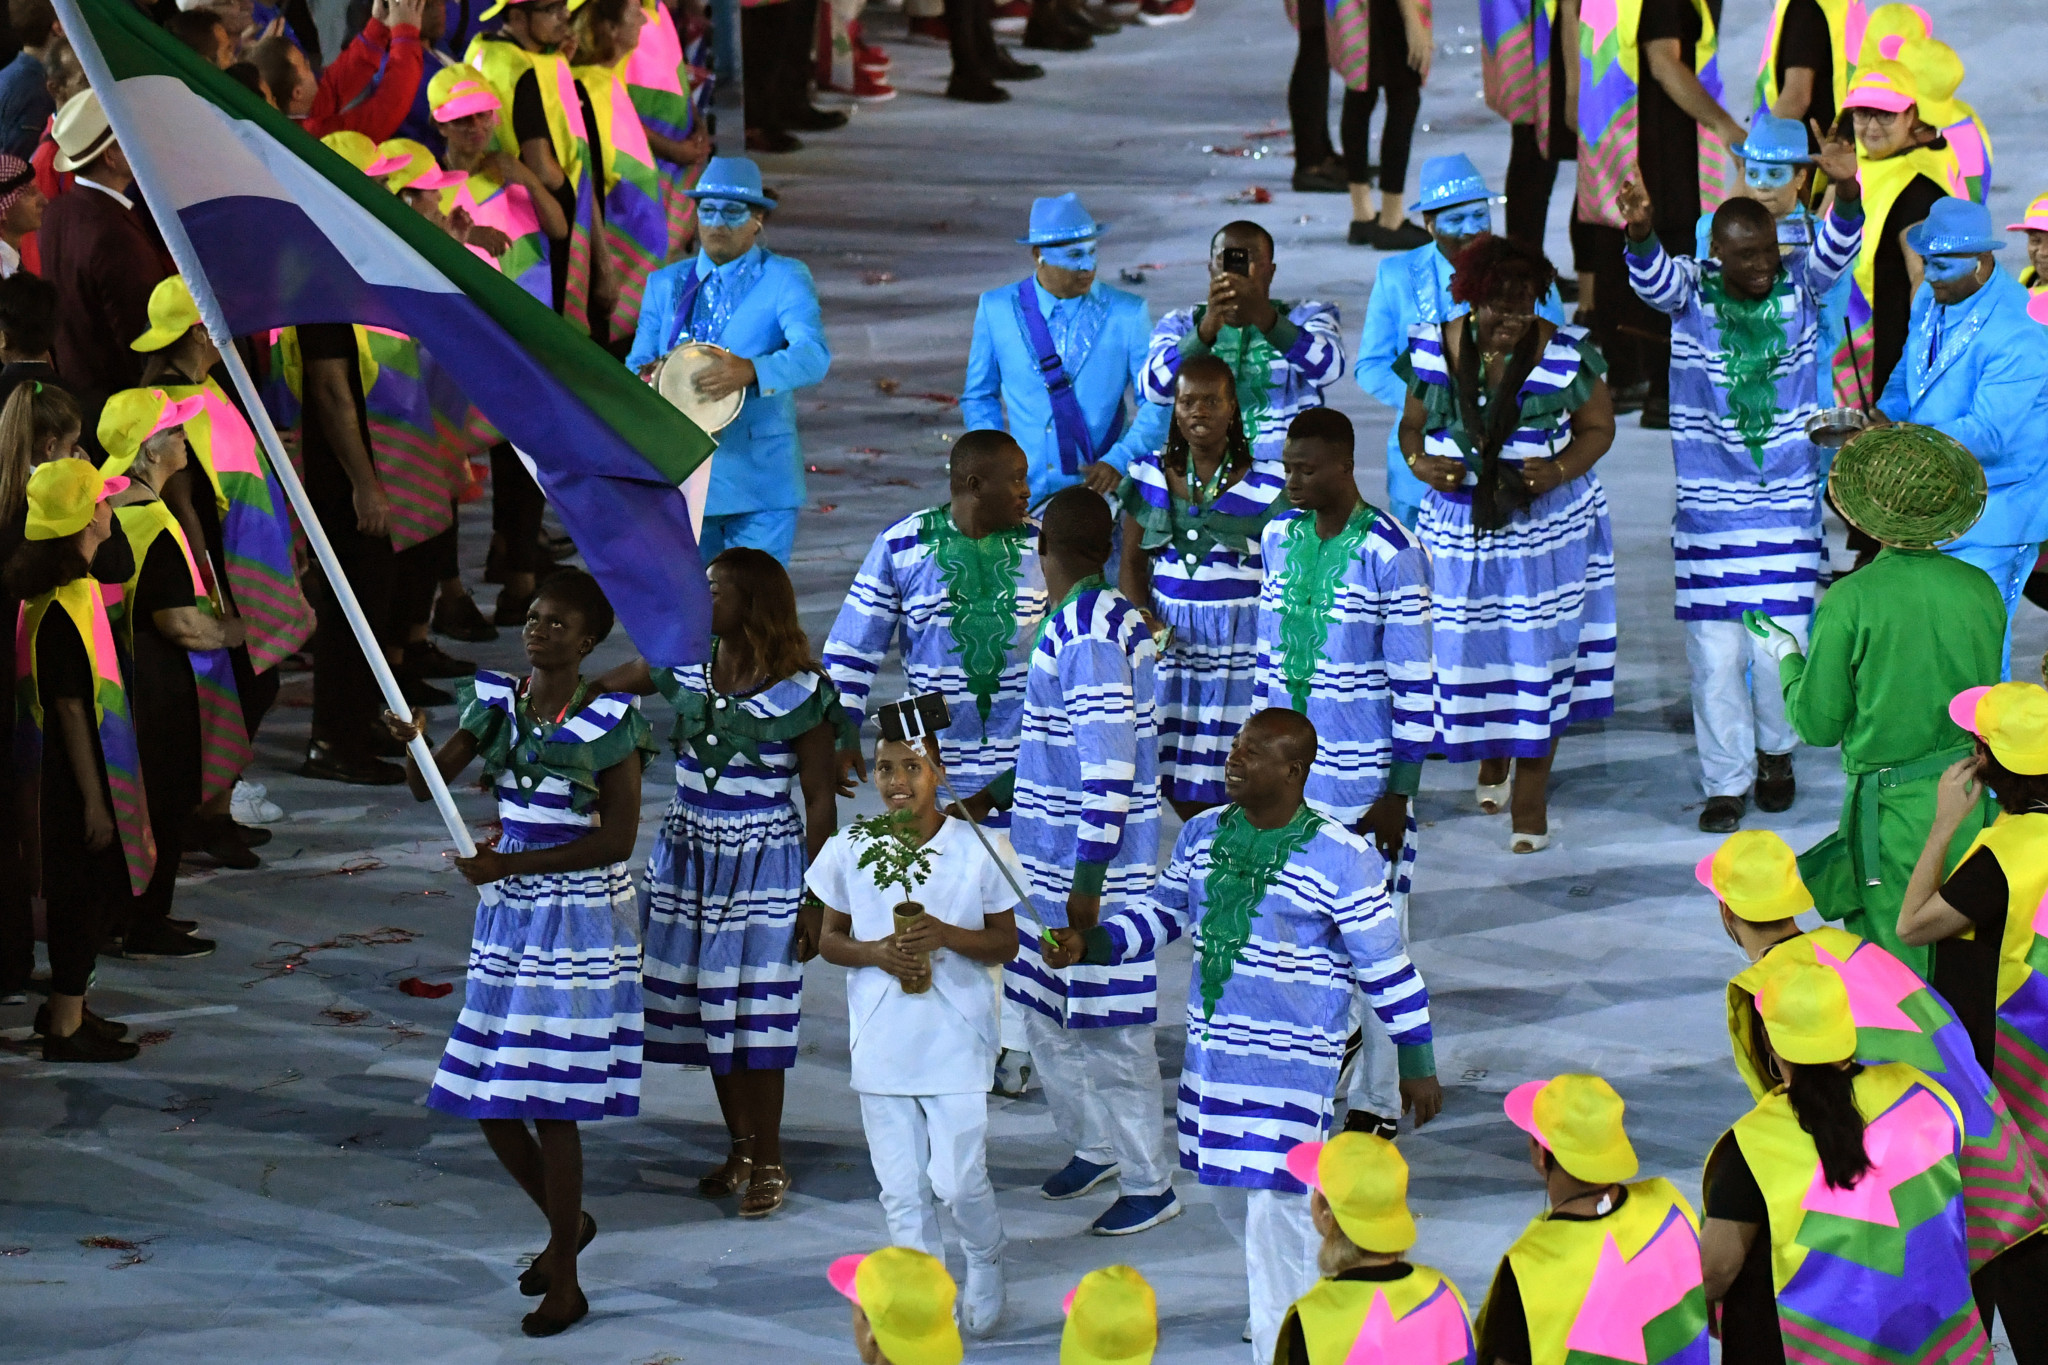 Sierra Leone has competed at 11 editions of the Summer Olympic Games, including Rio 2016 ©Getty Images